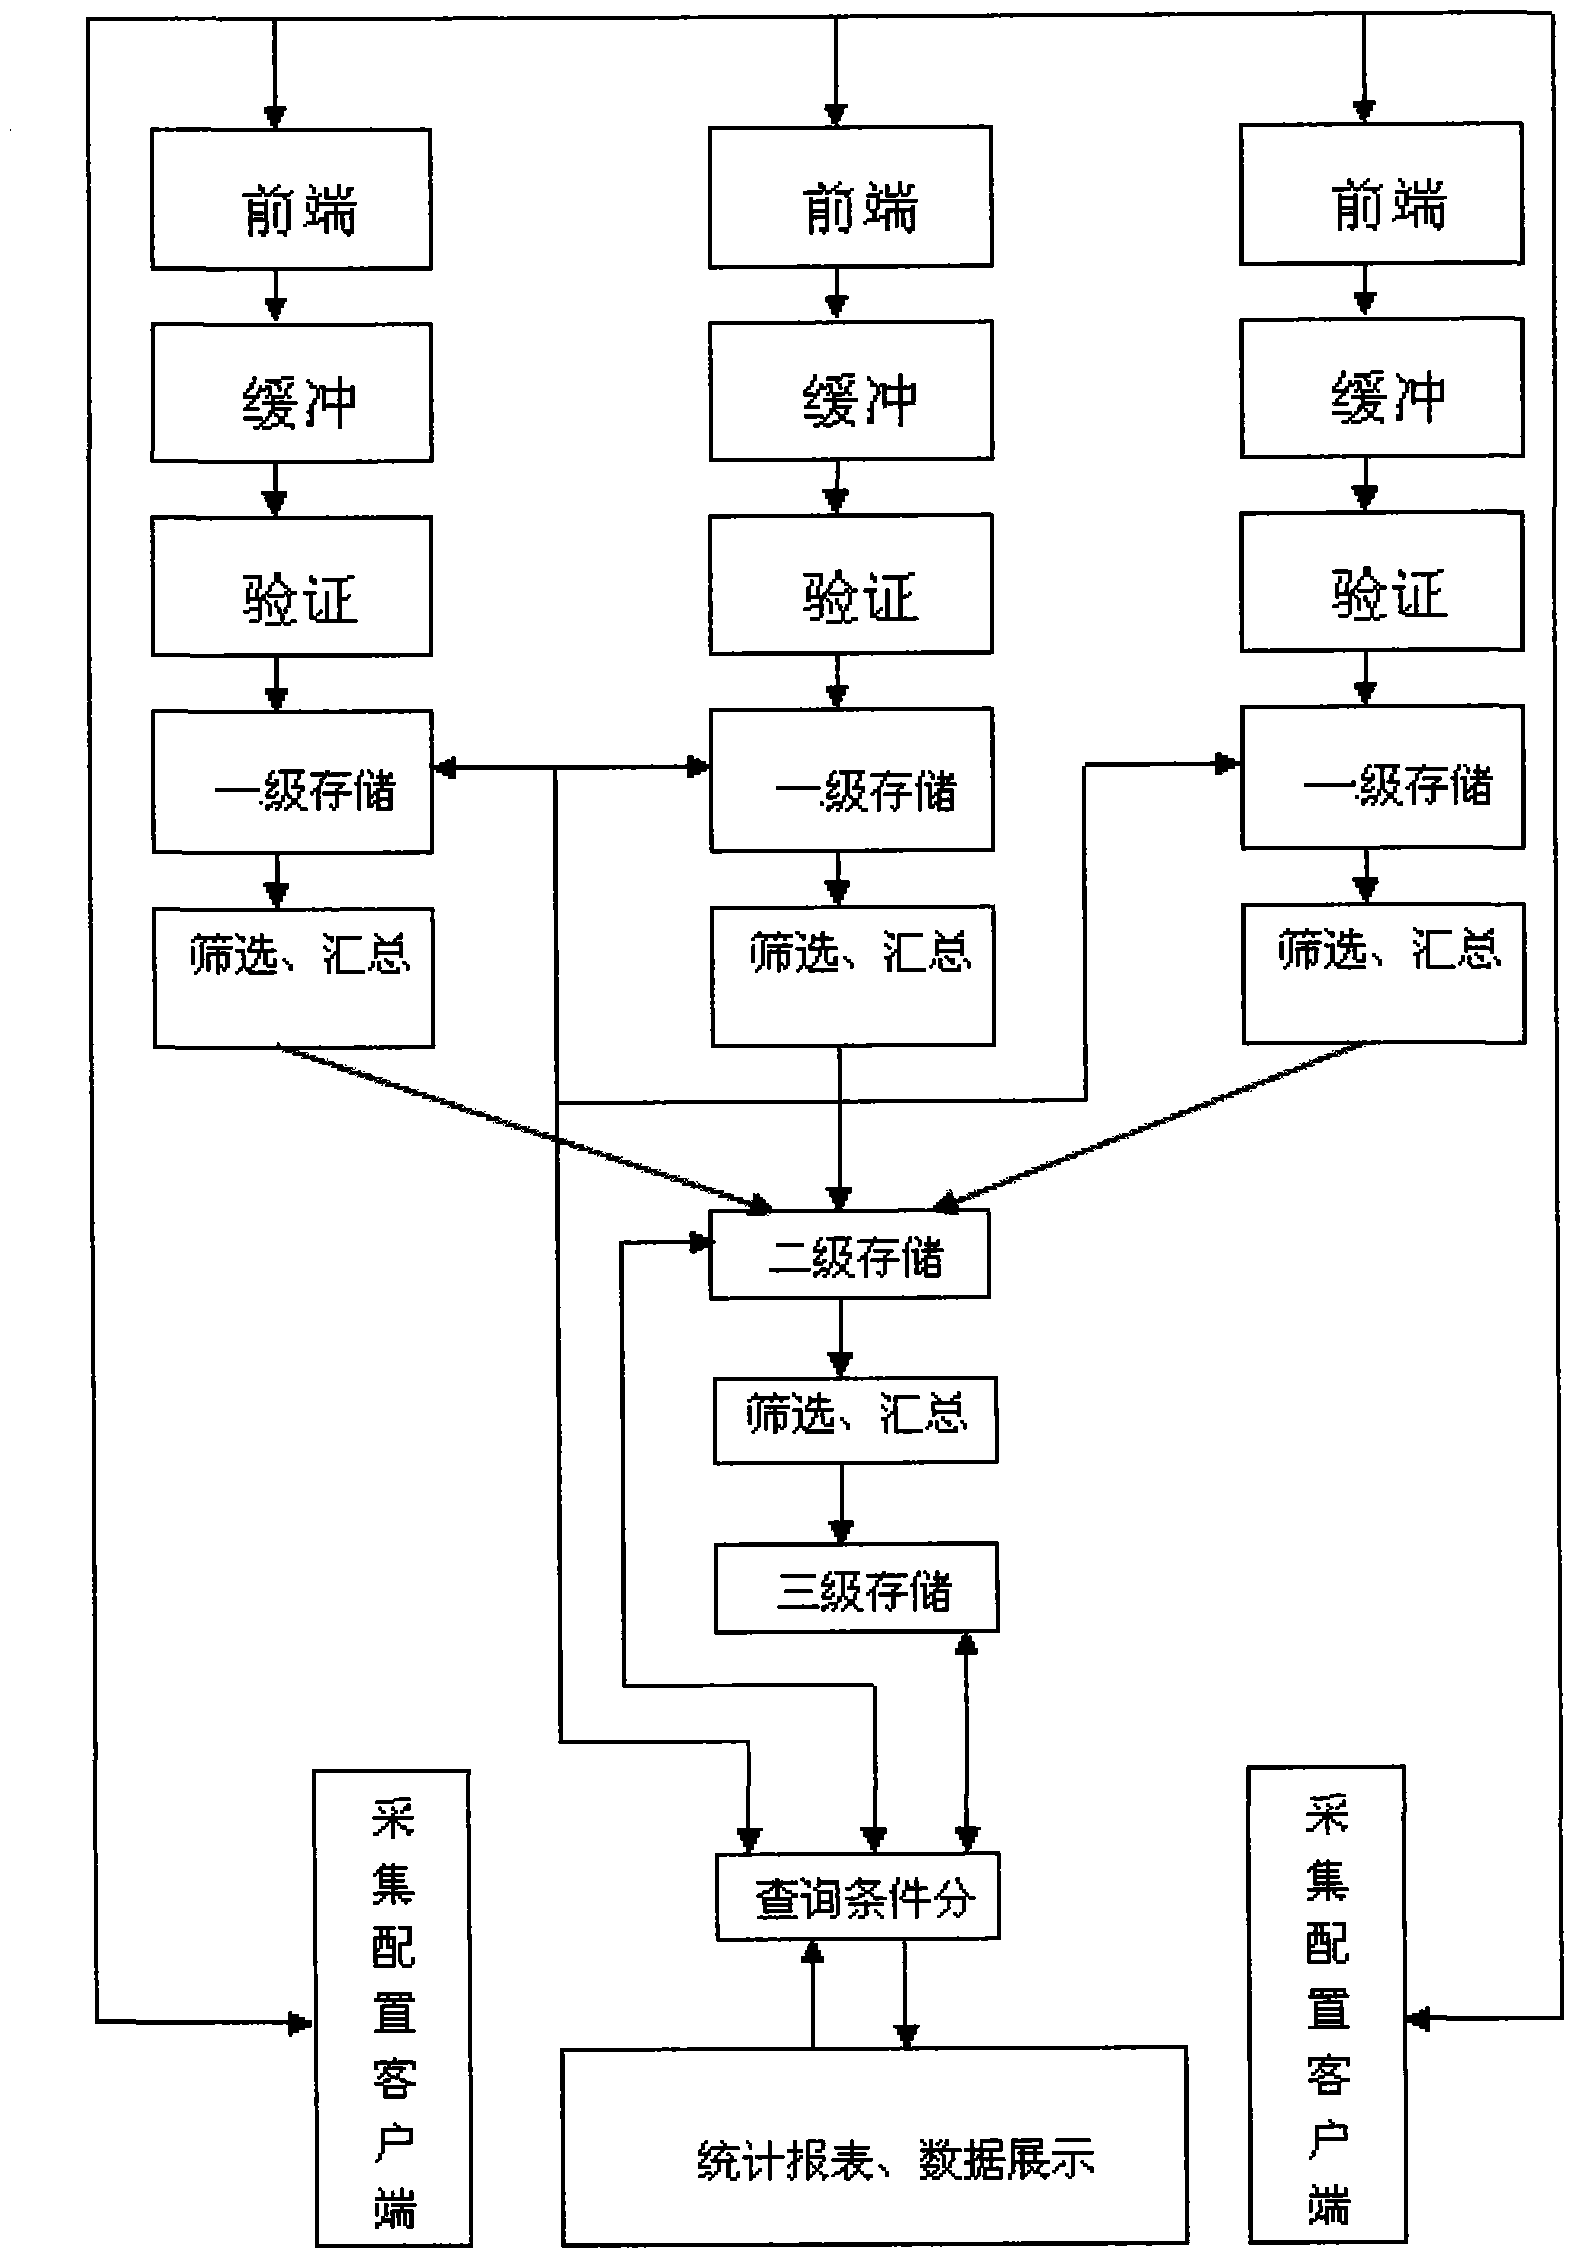 Industrial real-time data collecting system